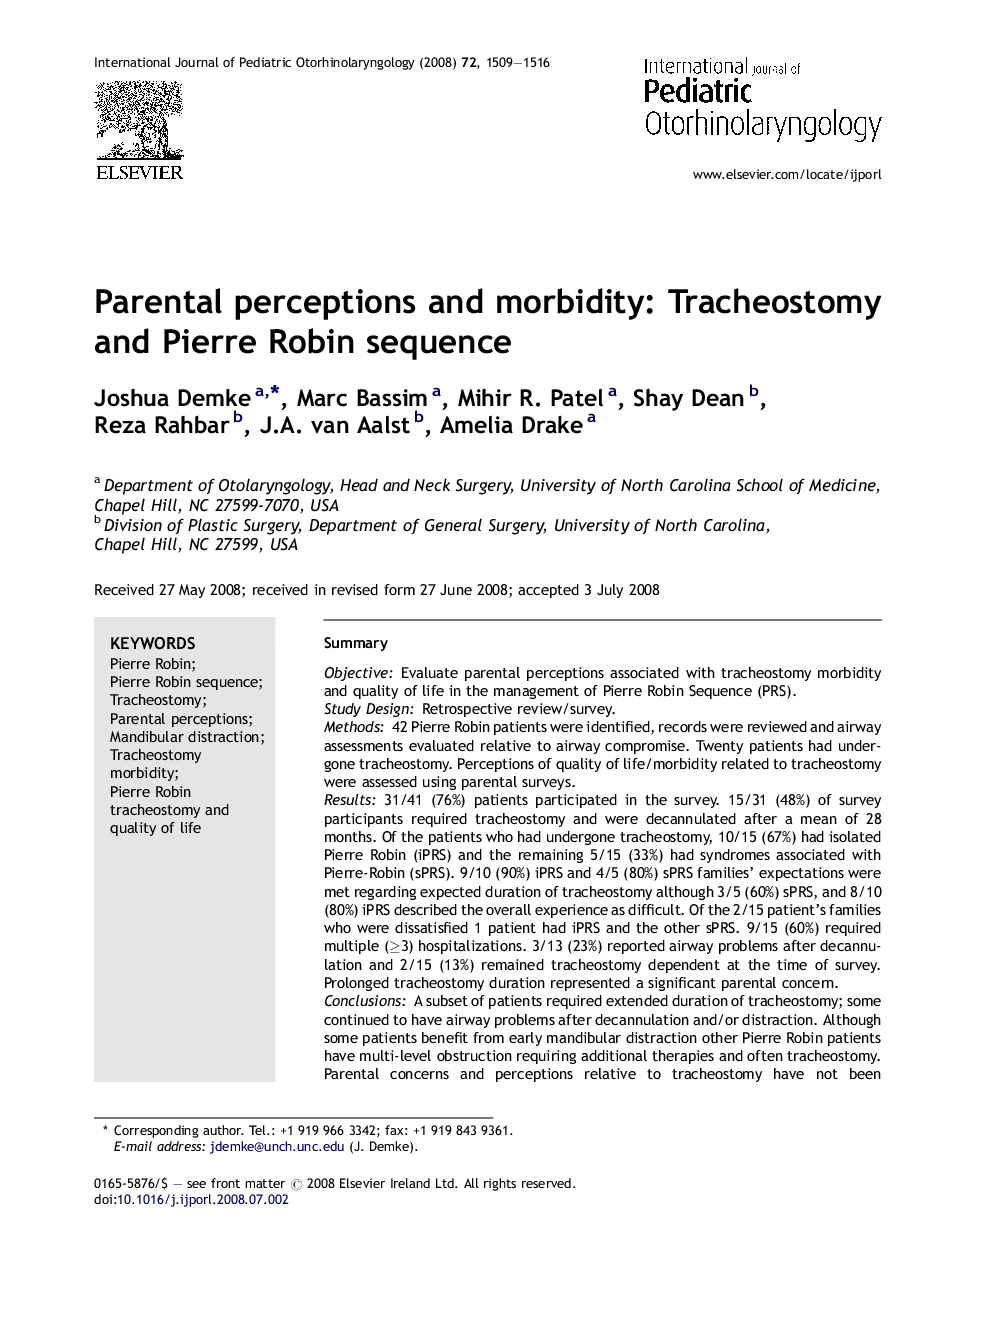 Parental perceptions and morbidity: Tracheostomy and Pierre Robin sequence